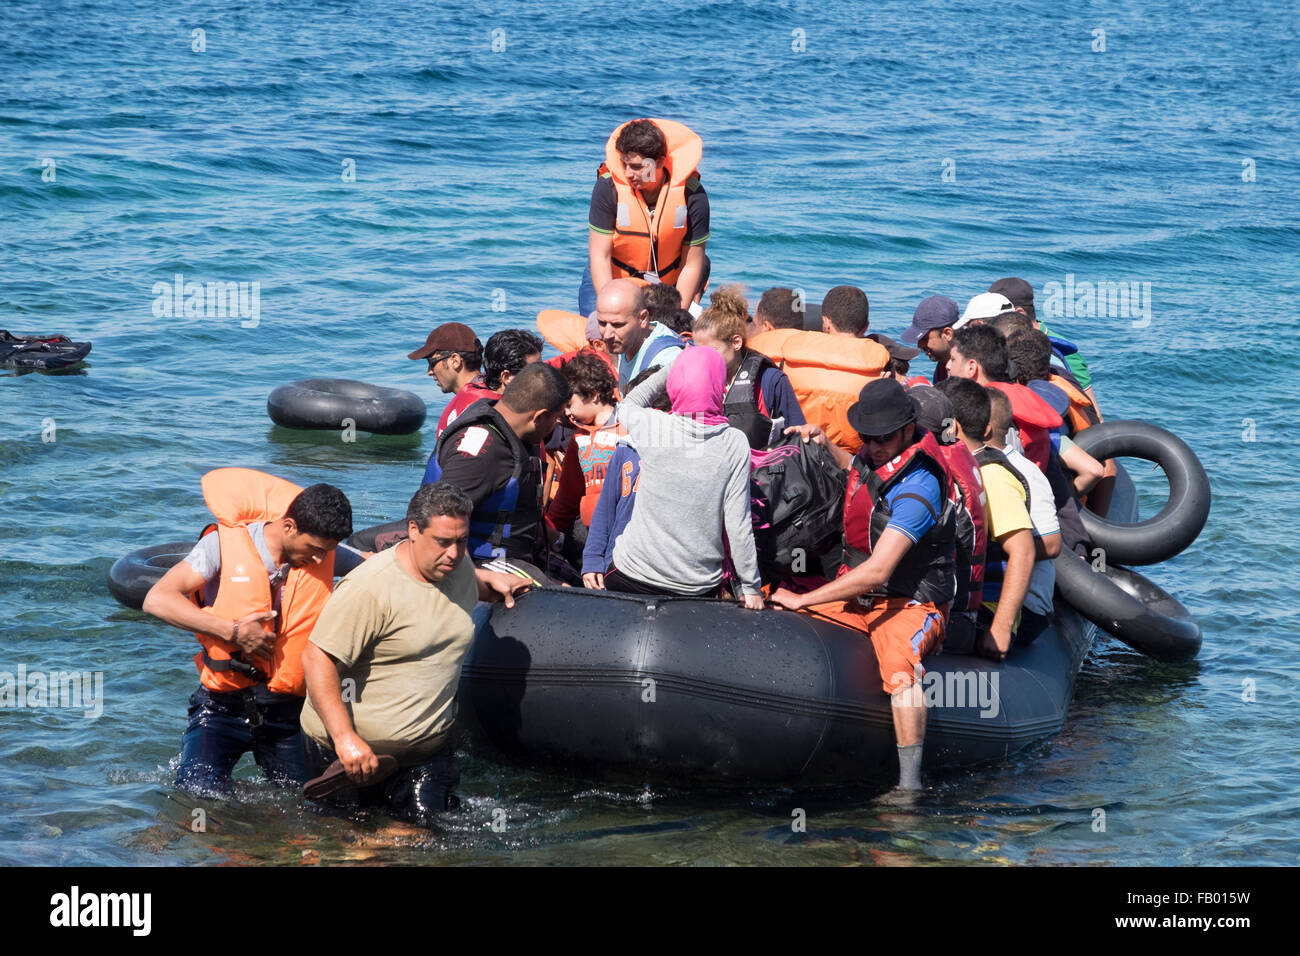 Syrian refugees cross from Turkey in a rubber raft to land on a beach on the Greek island of Lesvos/Lesbos Stock Photo